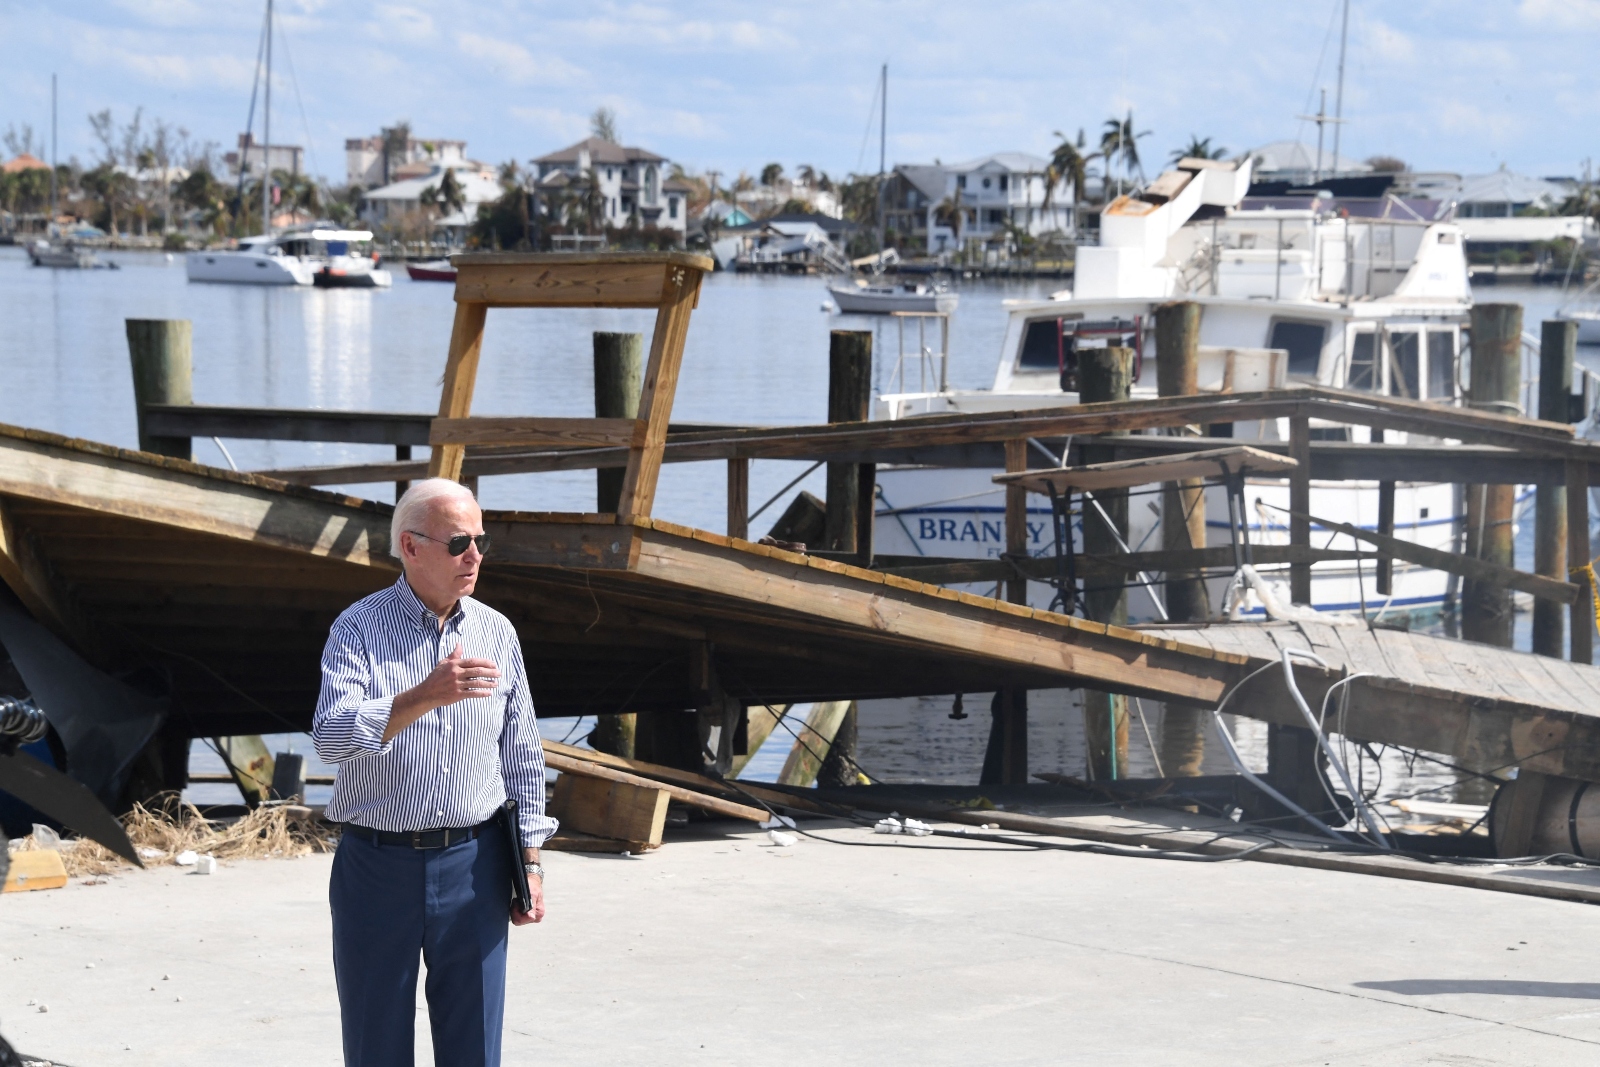 FEMA is making an example of this Florida boomtown. Locals call it ‘revenge politics.’